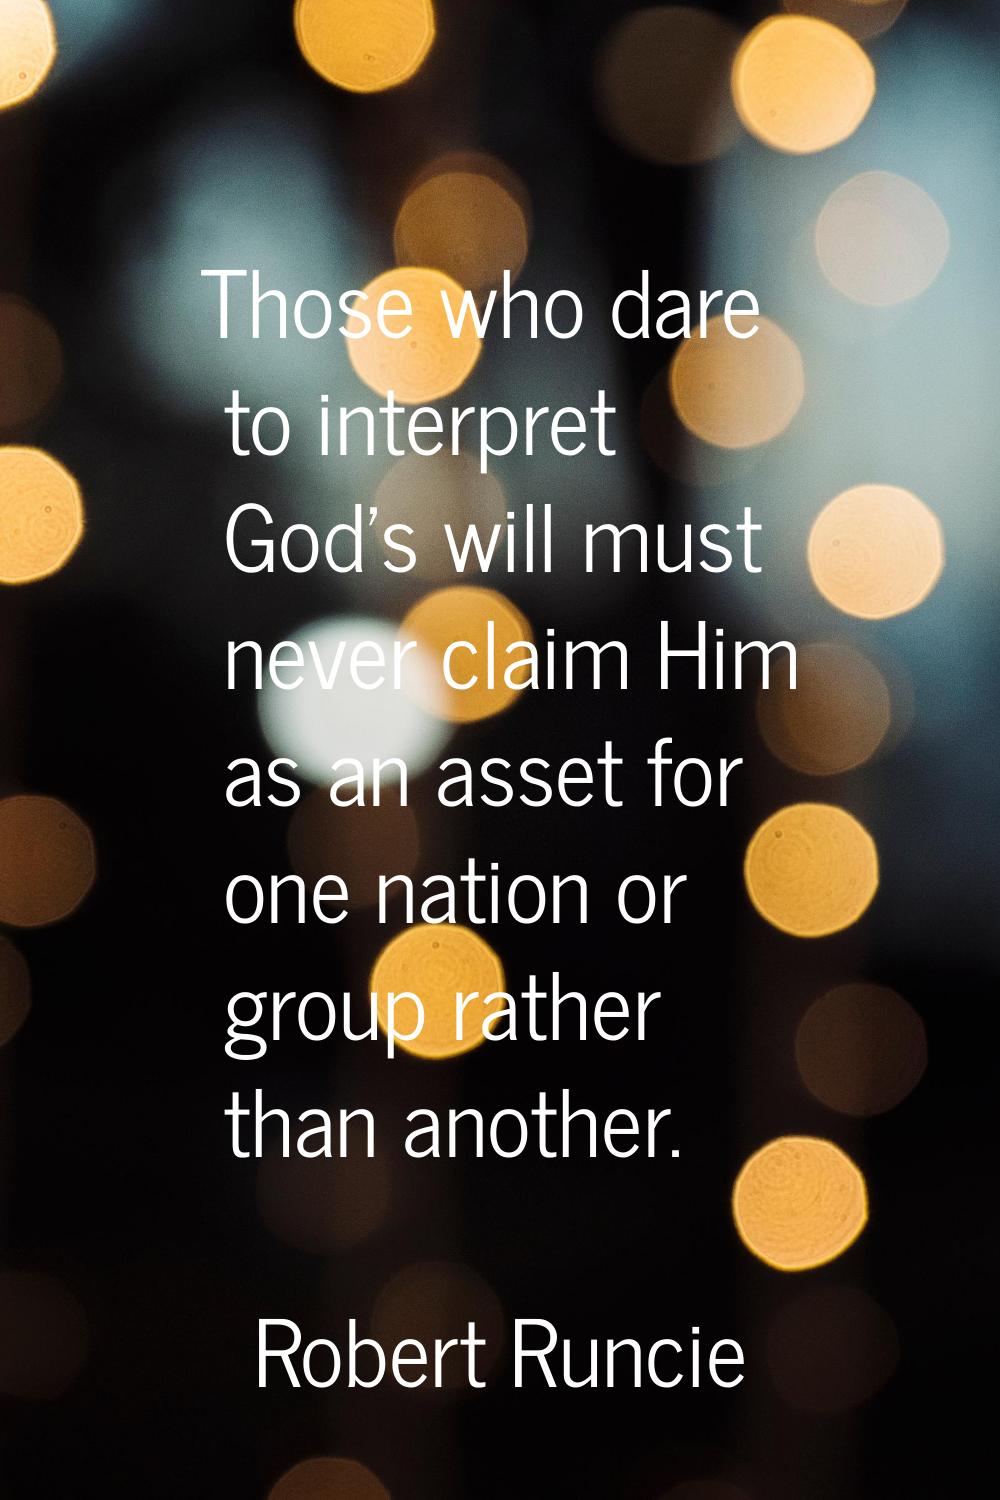 Those who dare to interpret God's will must never claim Him as an asset for one nation or group rat